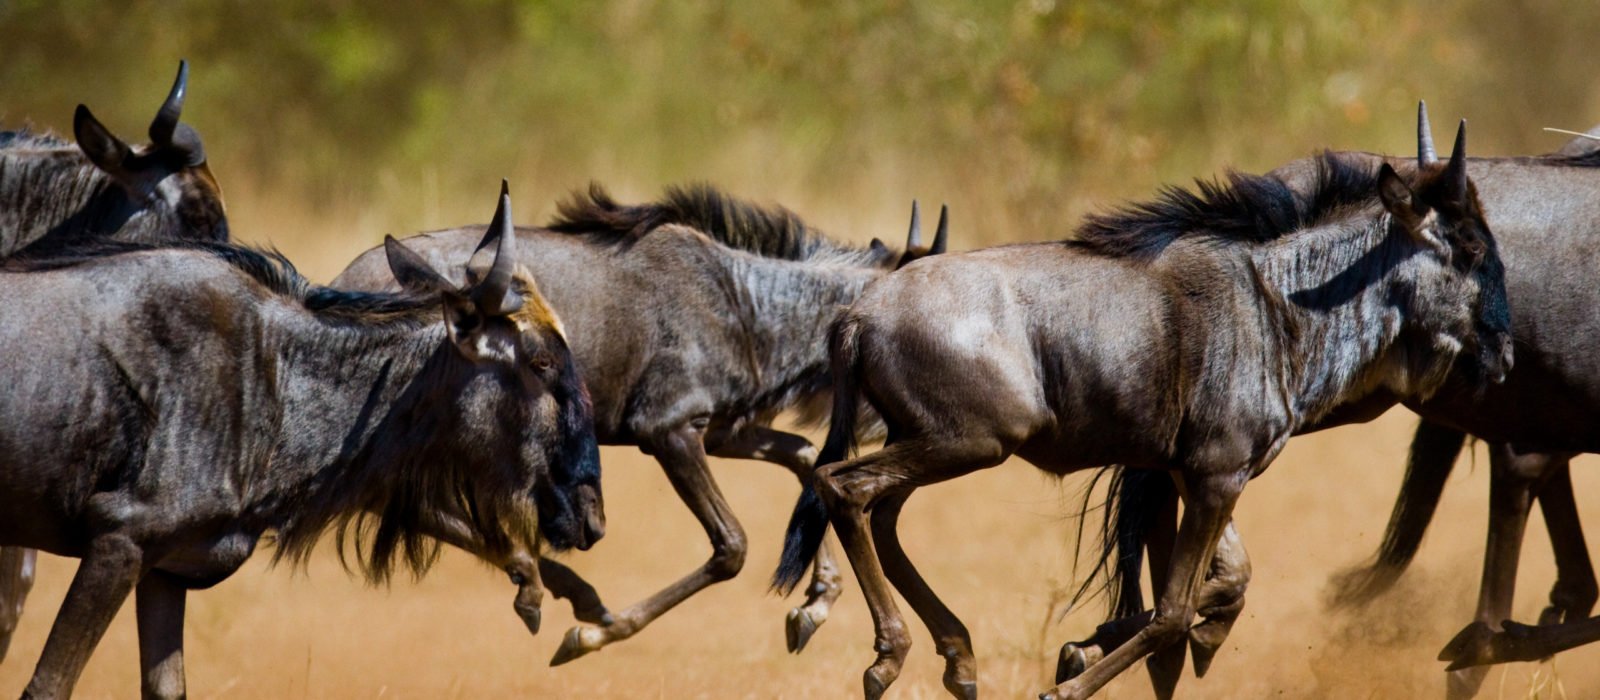 Wildebeests running through the savannah during the Great Migration